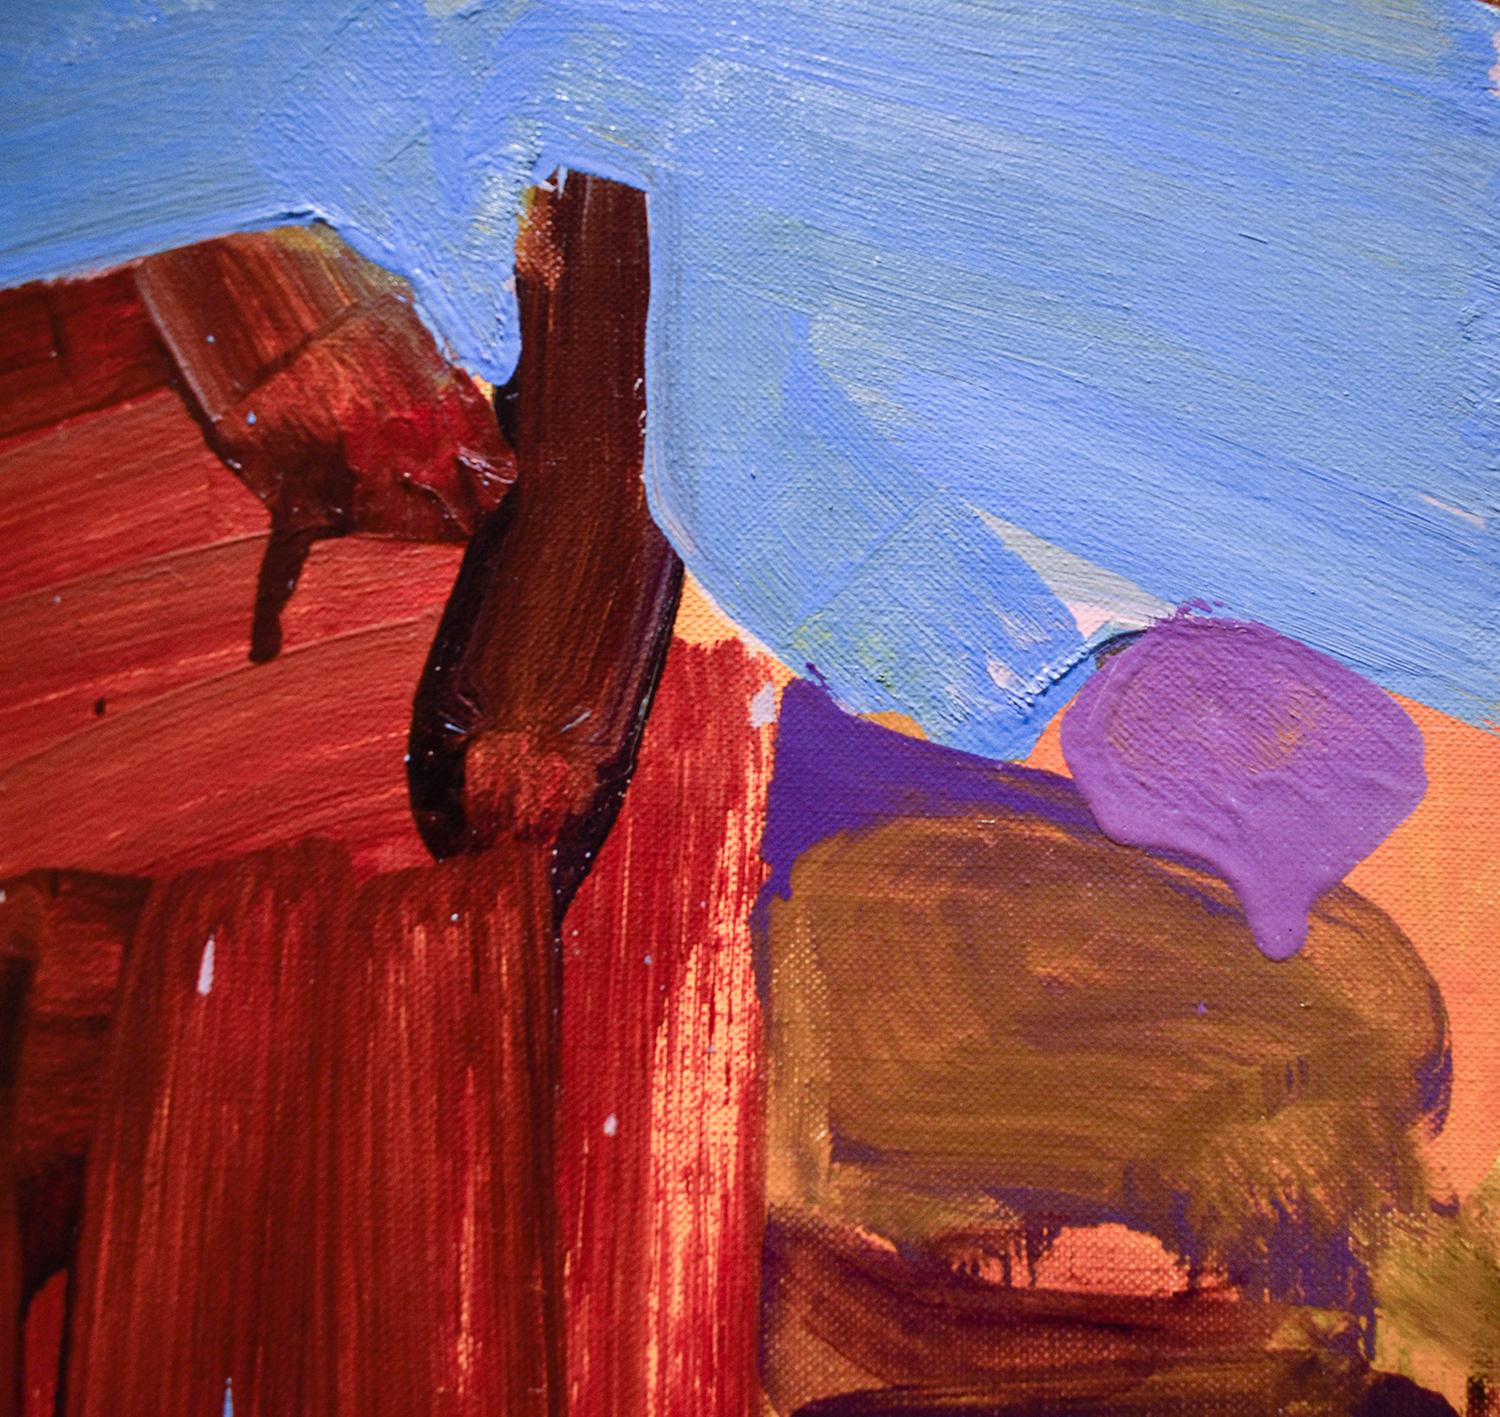 Abstract landscape painting of a red house in Duluth, Ireland by  William Clutz
“Red House Duluth” painted in 1967
22 x 18 inches in original wood frame with gold veneer detail 
Wire backing, signed verso

This expressionist landscape was painted in